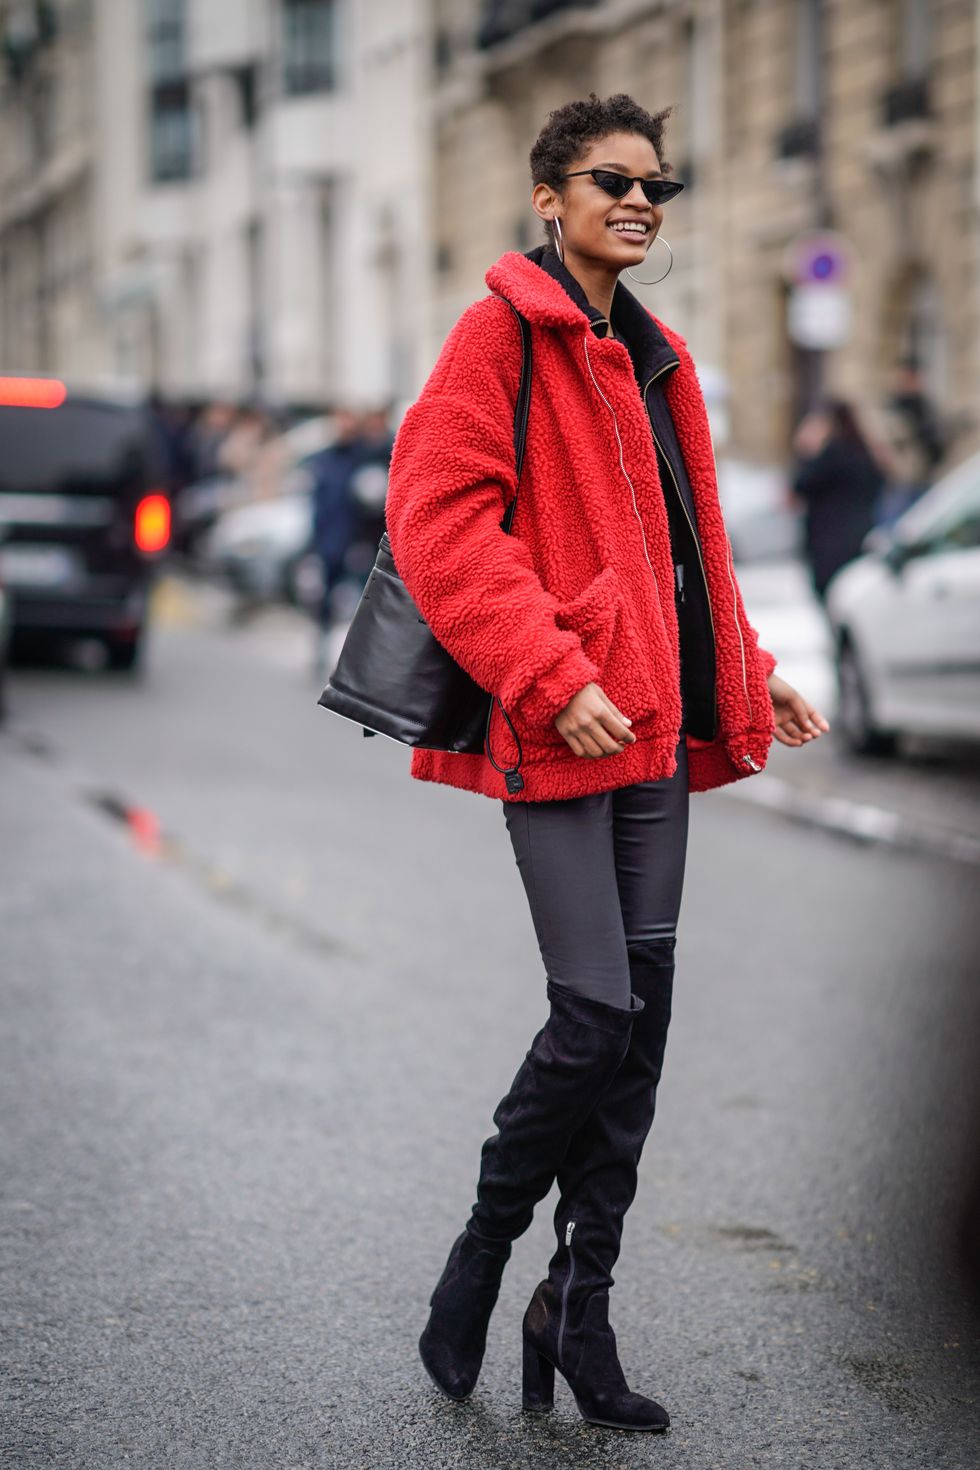 PARIS, FRANCE - MARCH 01:  A model wears a red coat, black thigh high boots, during Paris Fashion Week Womenswear Fall/Winter 2018/2019, on March 1, 2018 in Paris, France.  (Photo by Edward Berthelot/Getty Images)